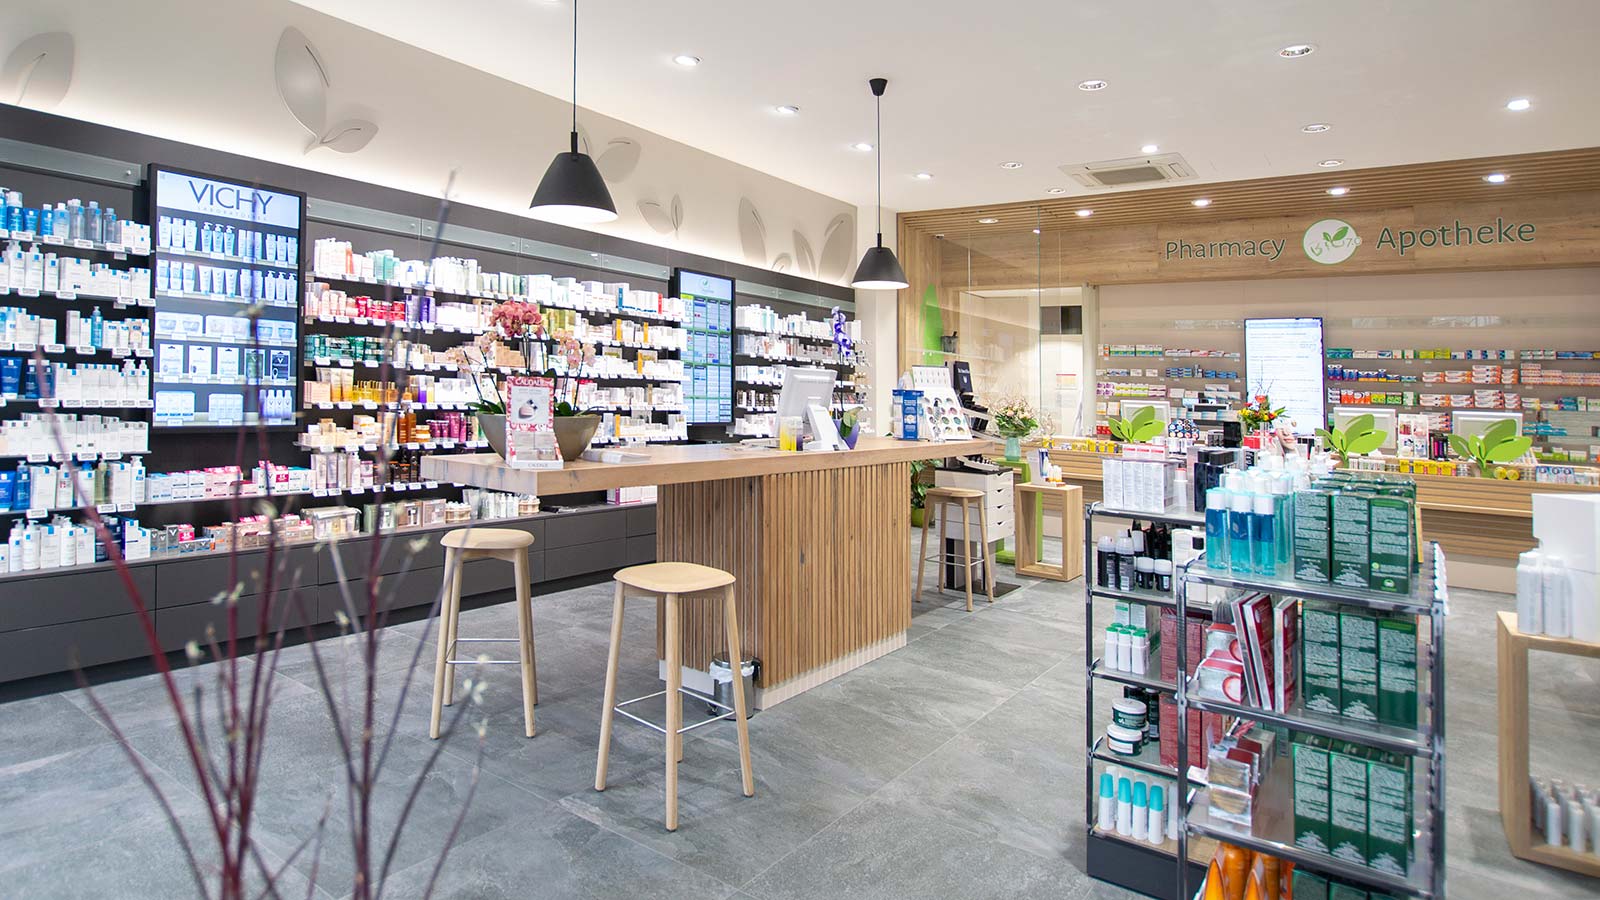 Rolf Rissel Objekteinrichtungen GmbH designs complete concepts for drugstores that are intended to appeal to visitors emotions.